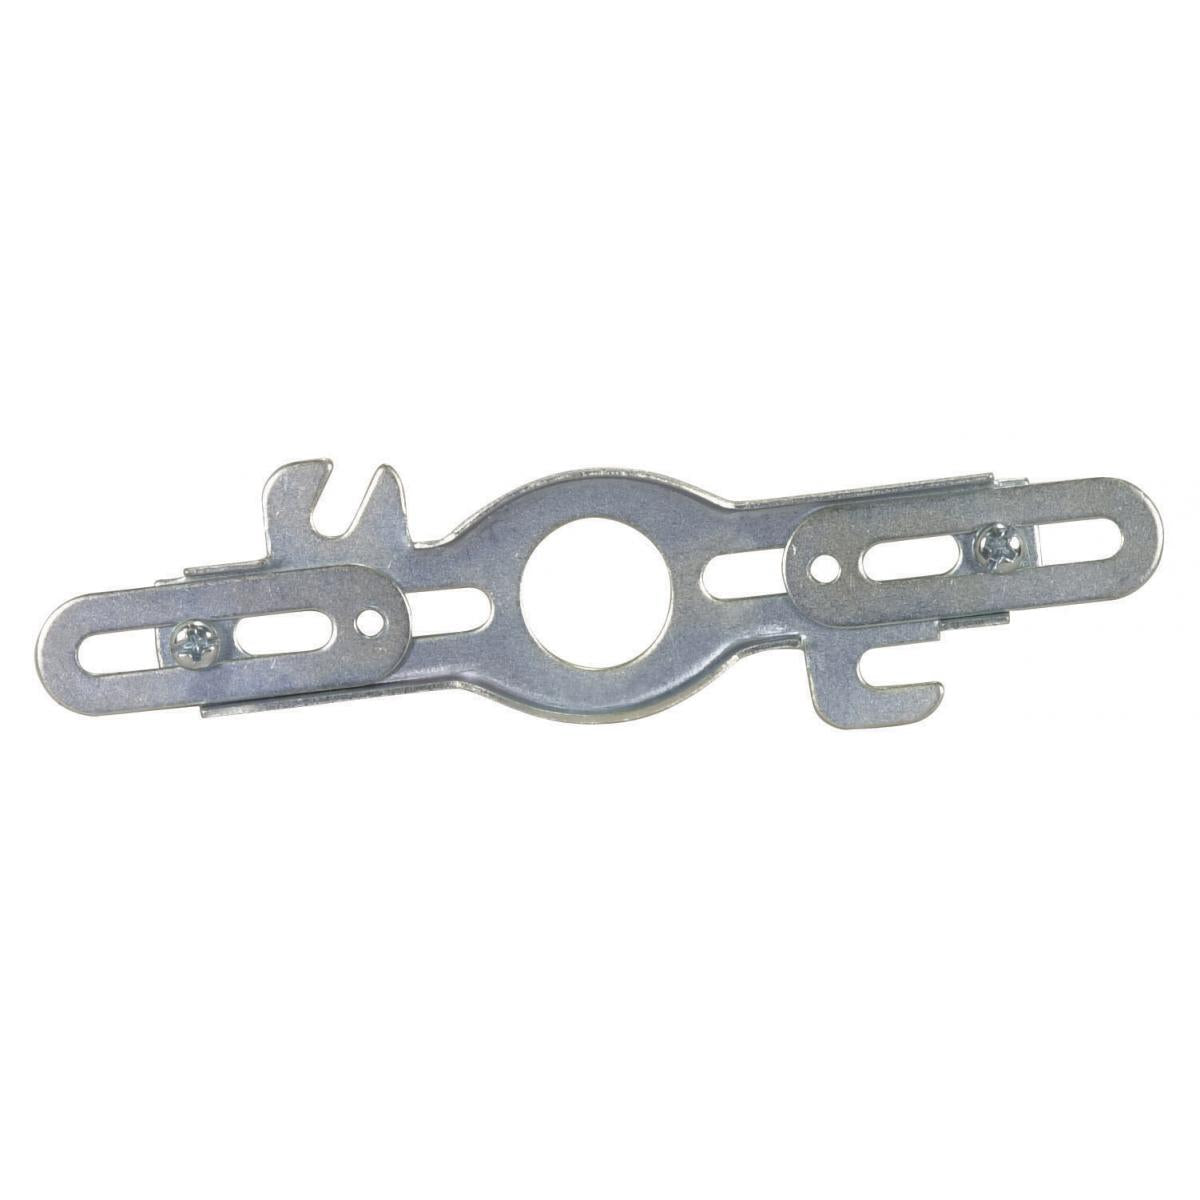 Satco 90-179 Adjustable Crossbar Center Hole Slips 3/8 IP Adjusts From 4-1/2" to 6-1/2"